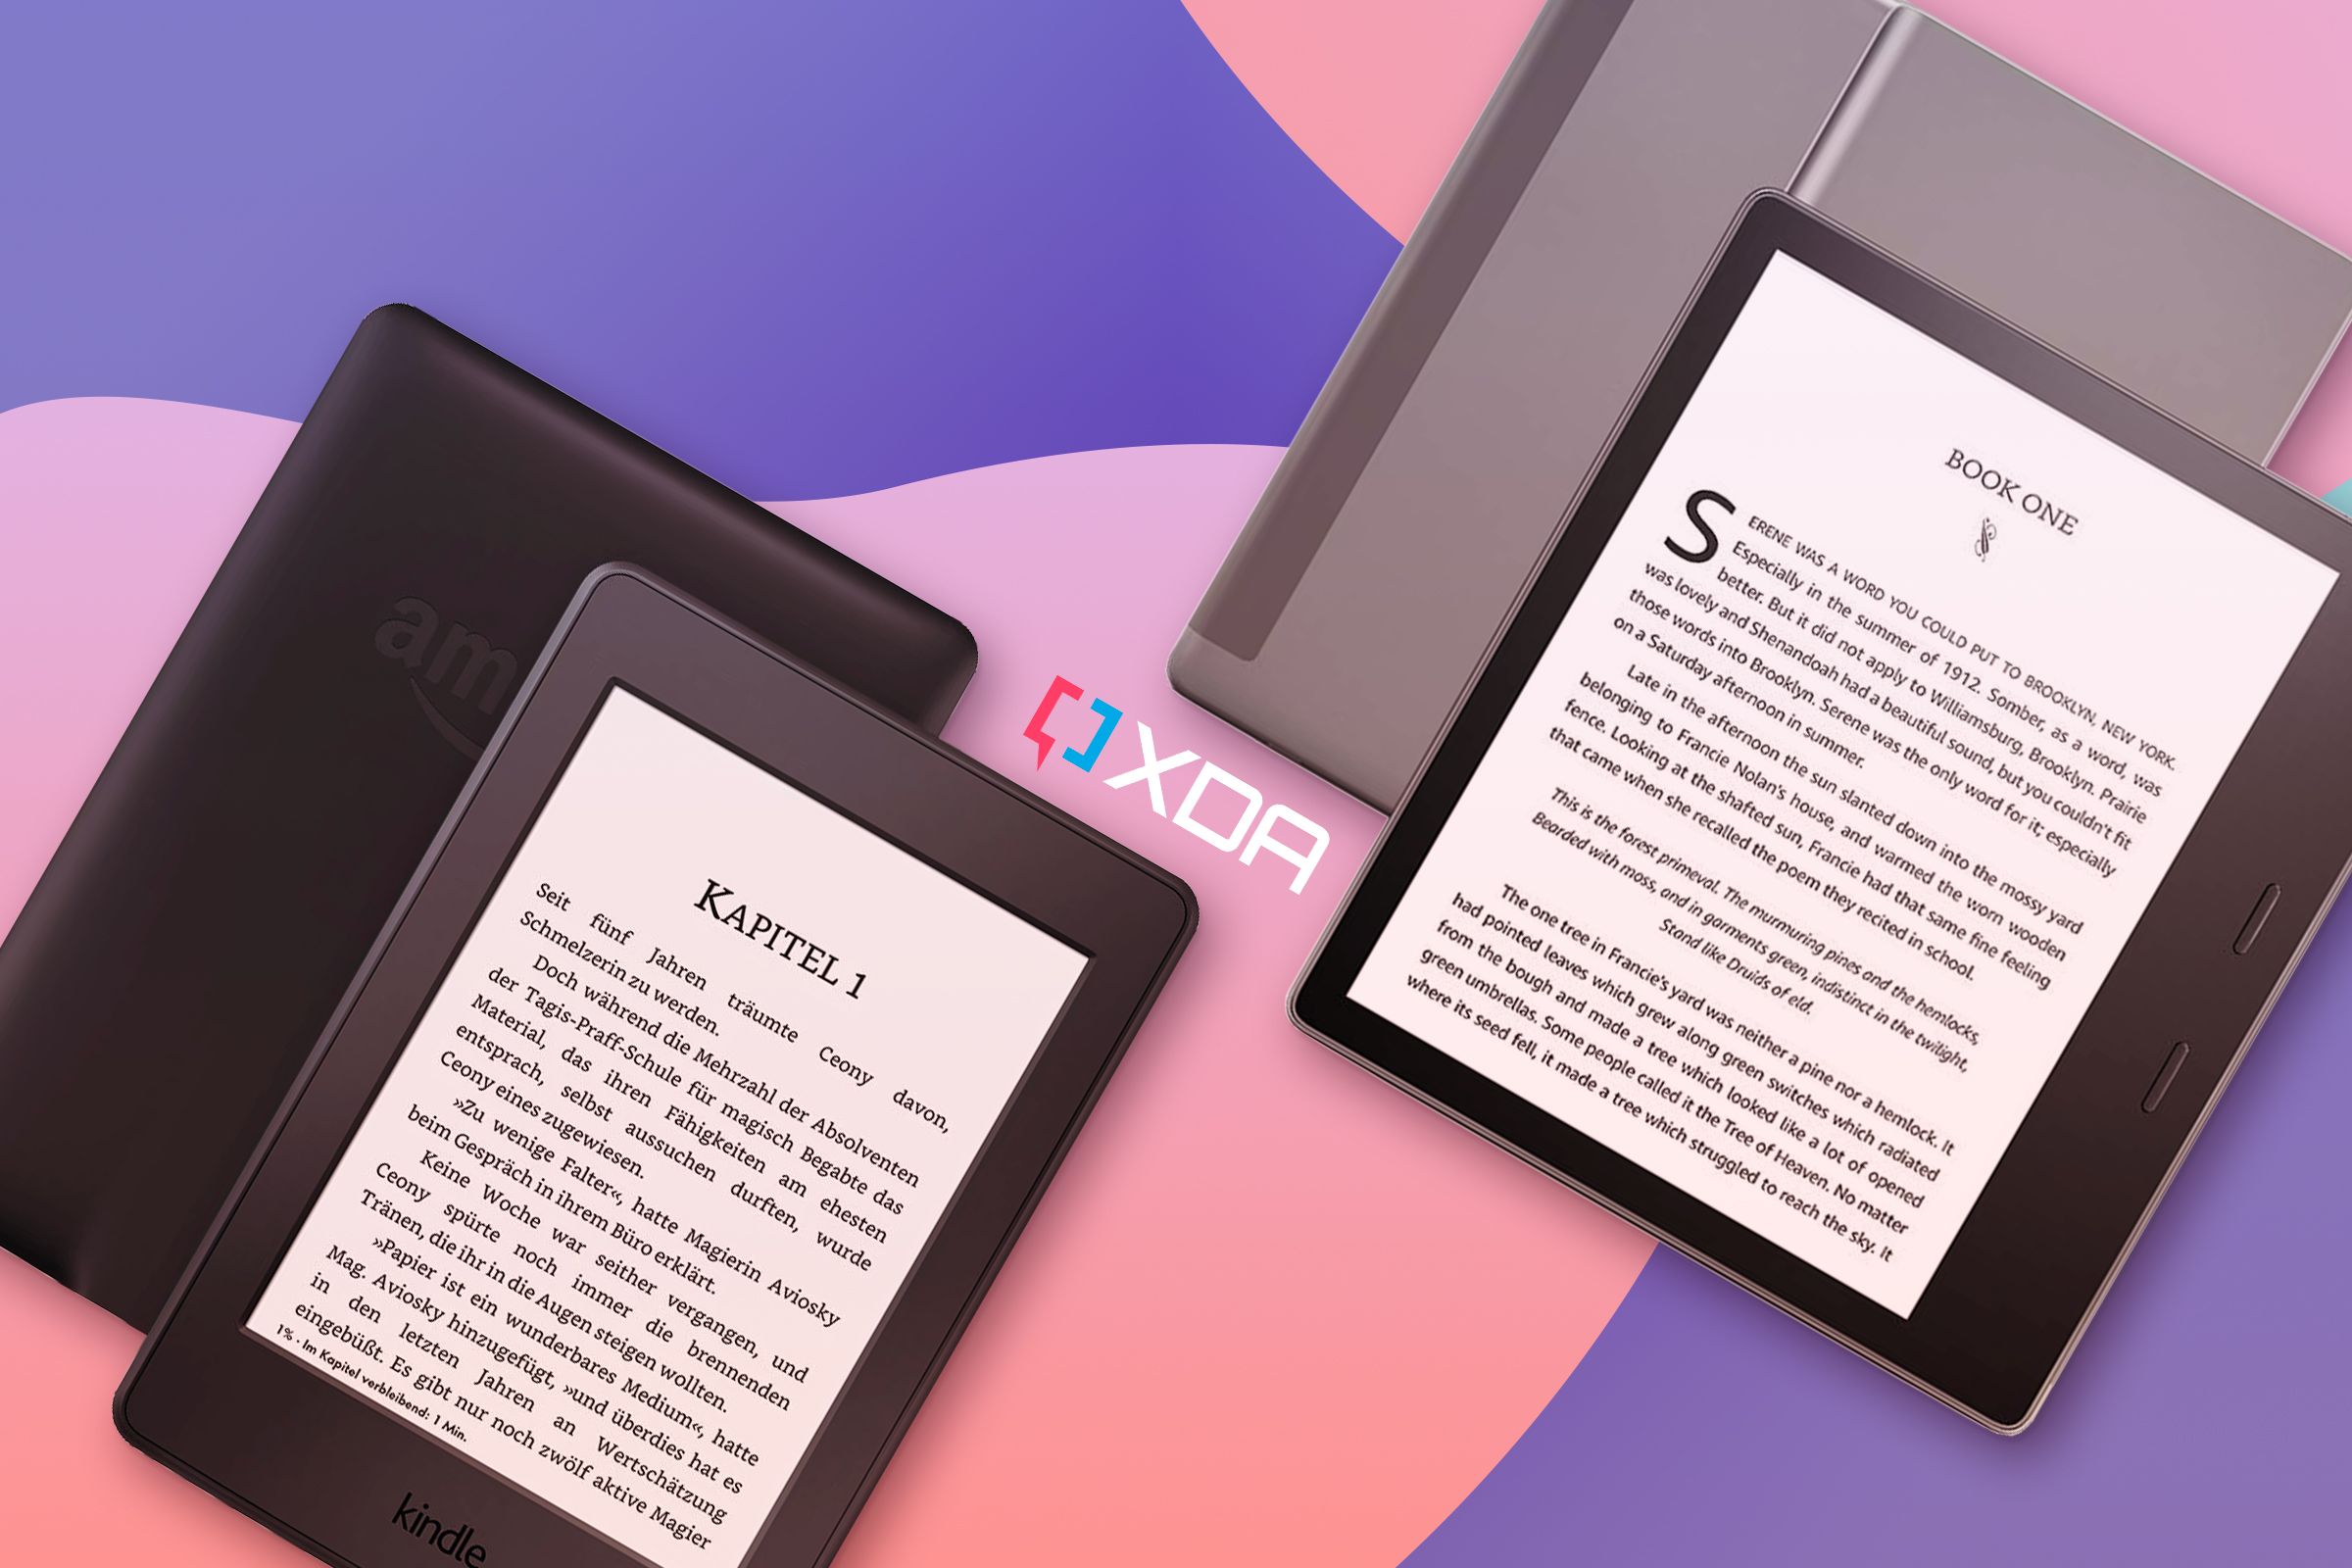 Best Kindle e-readers 